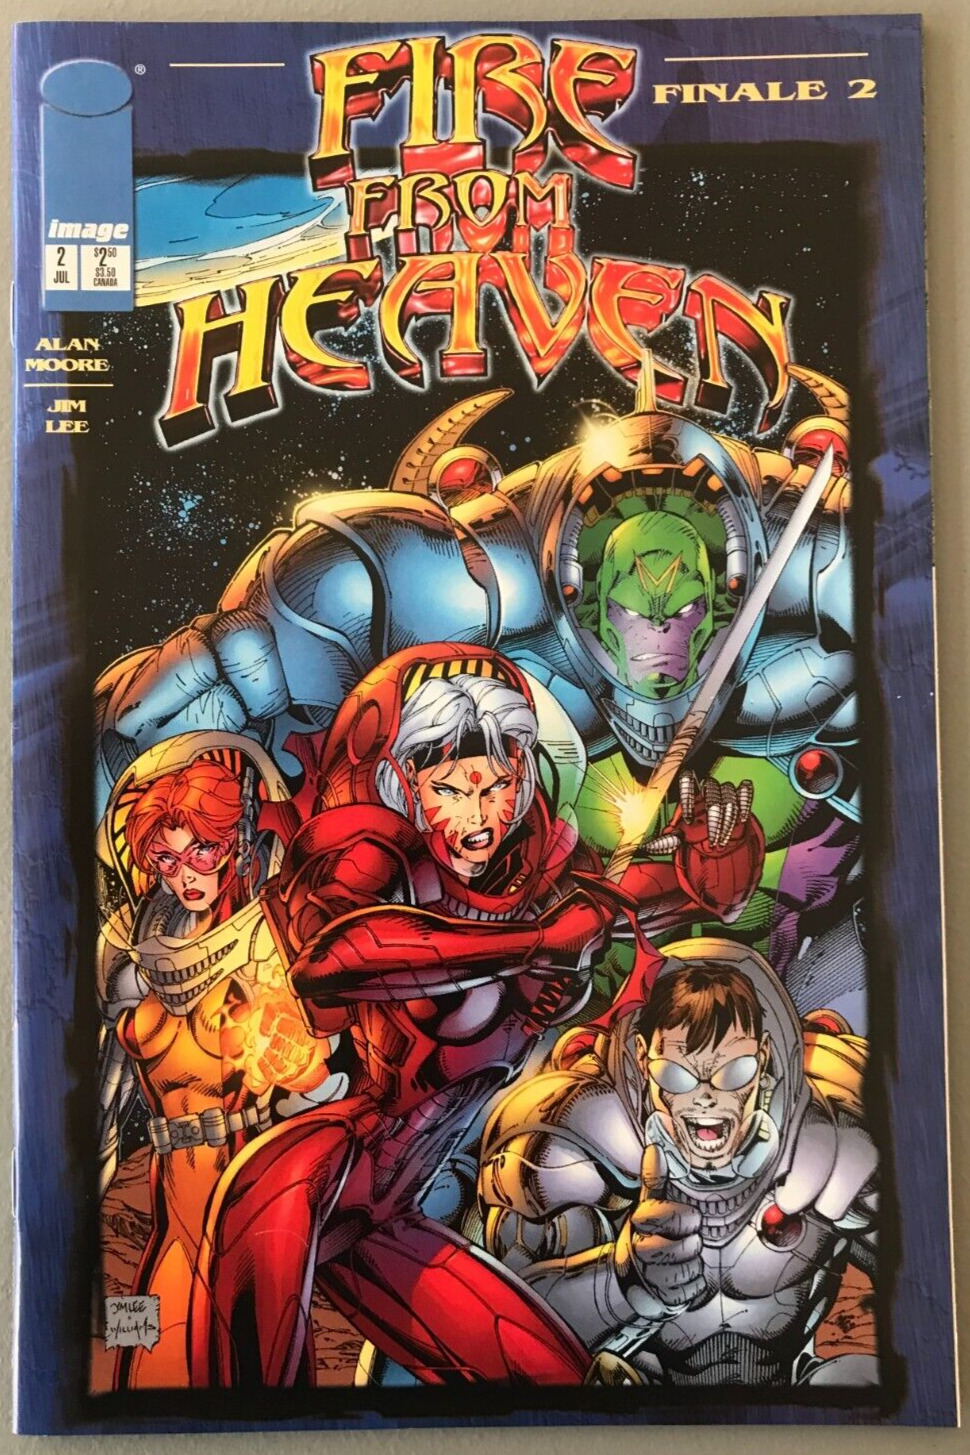 Fire From Heaven #2 Alan Moore Jim Lee Wildcats Final Issue Image NM/M 1996